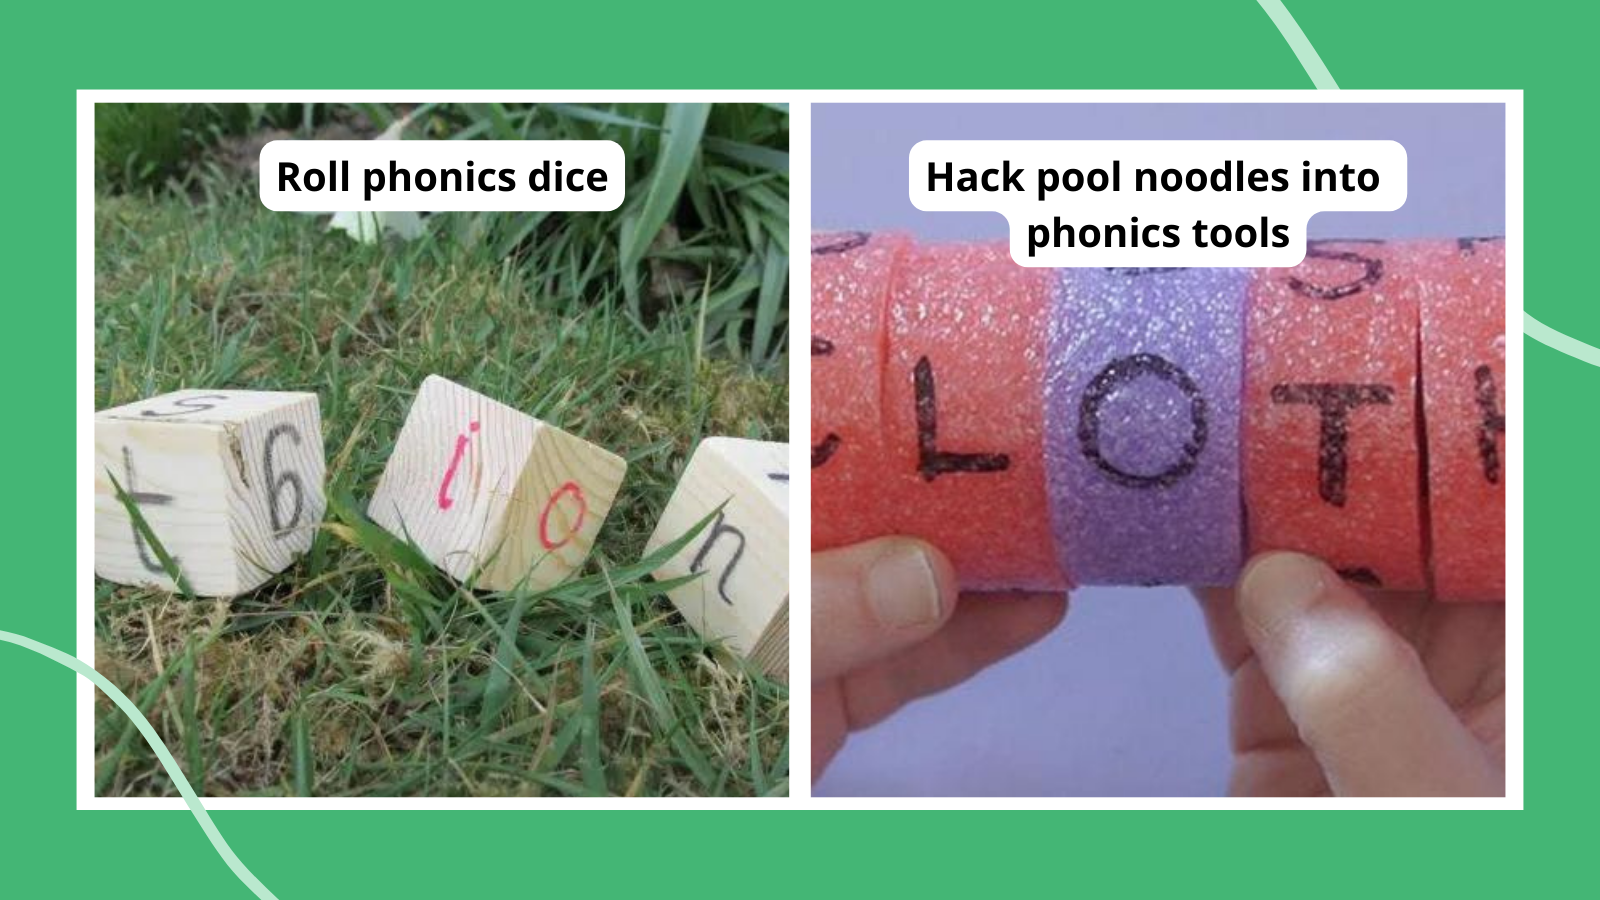 Phonics activities including rolling wooden phonics dice on the grass and hacking pool noodles into phonics tools